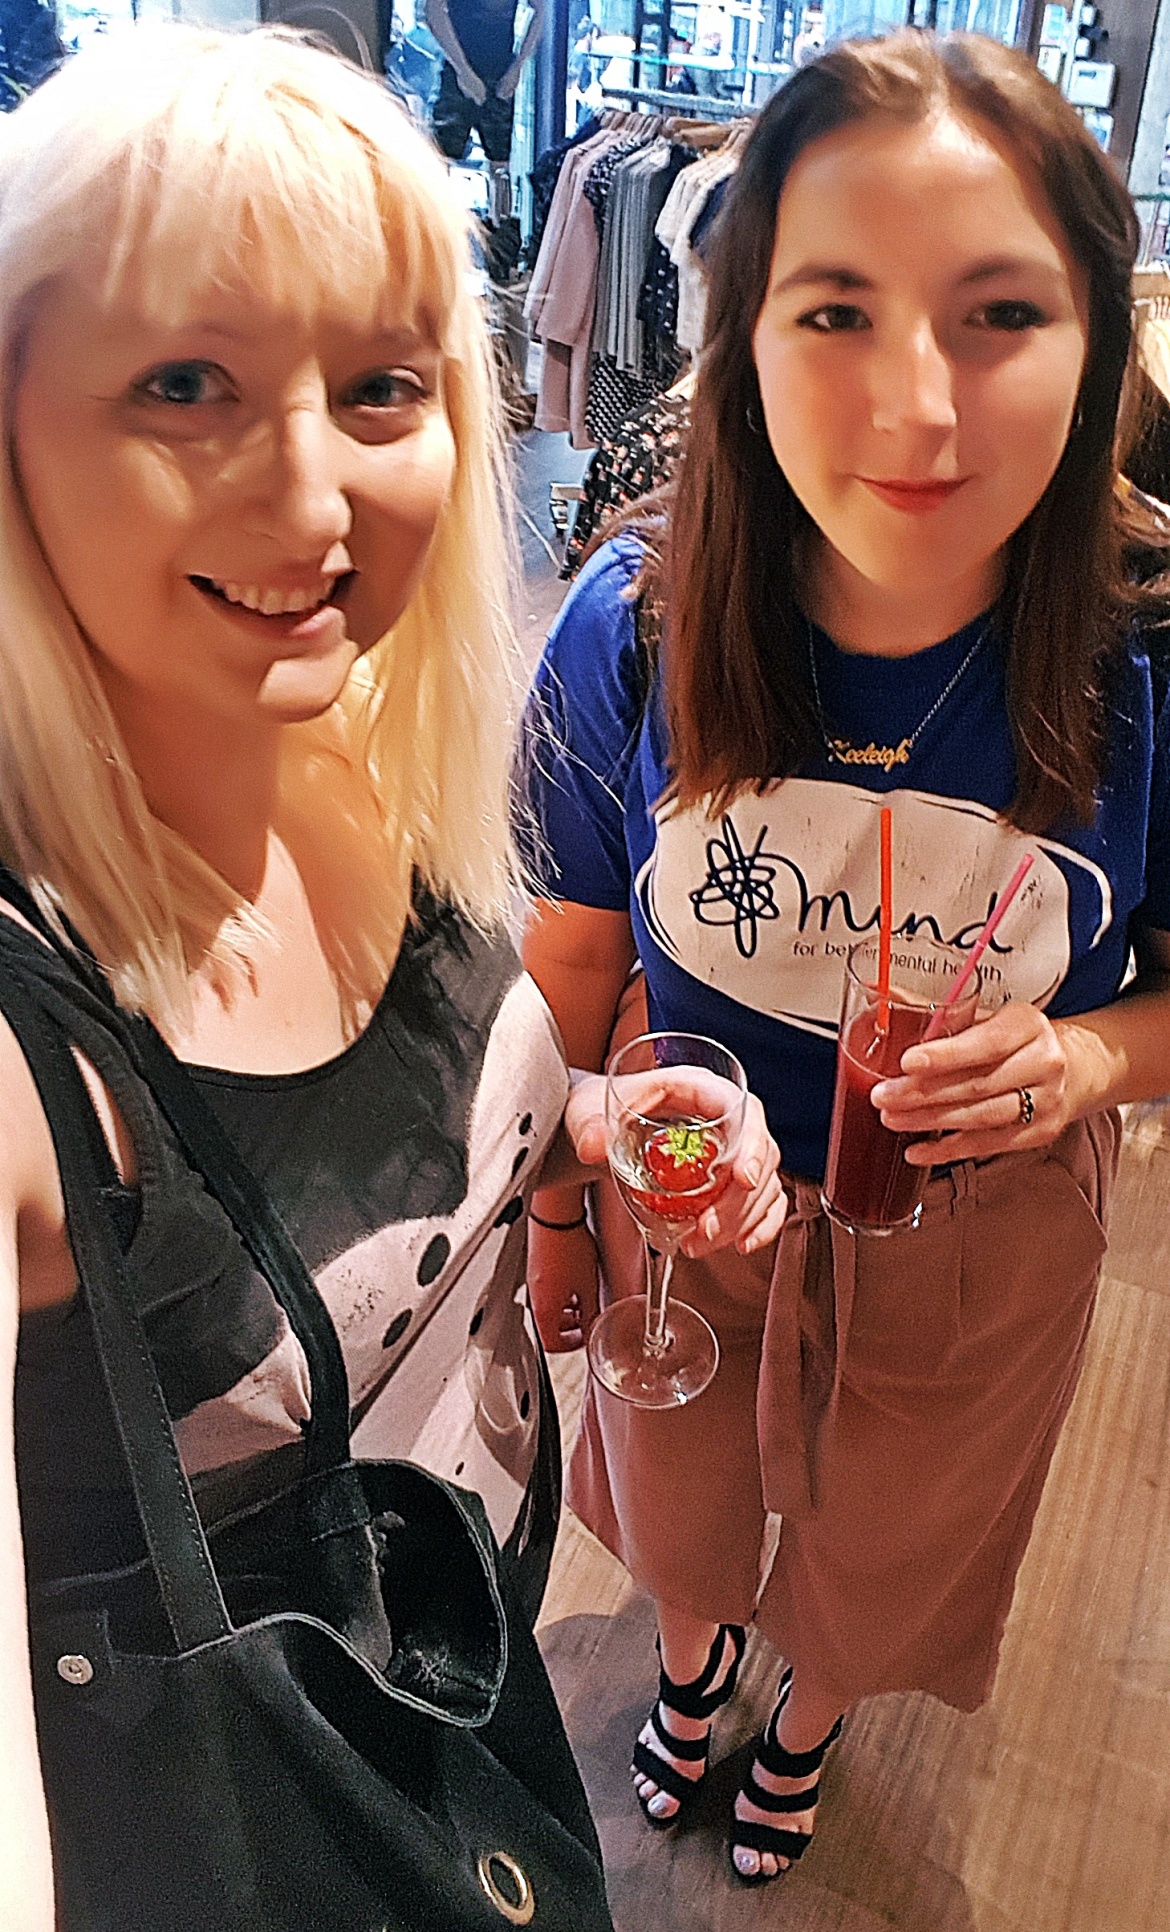 Keeleigh and I at the Joy event - August 2017 Recap by BeckyBecky Blogs